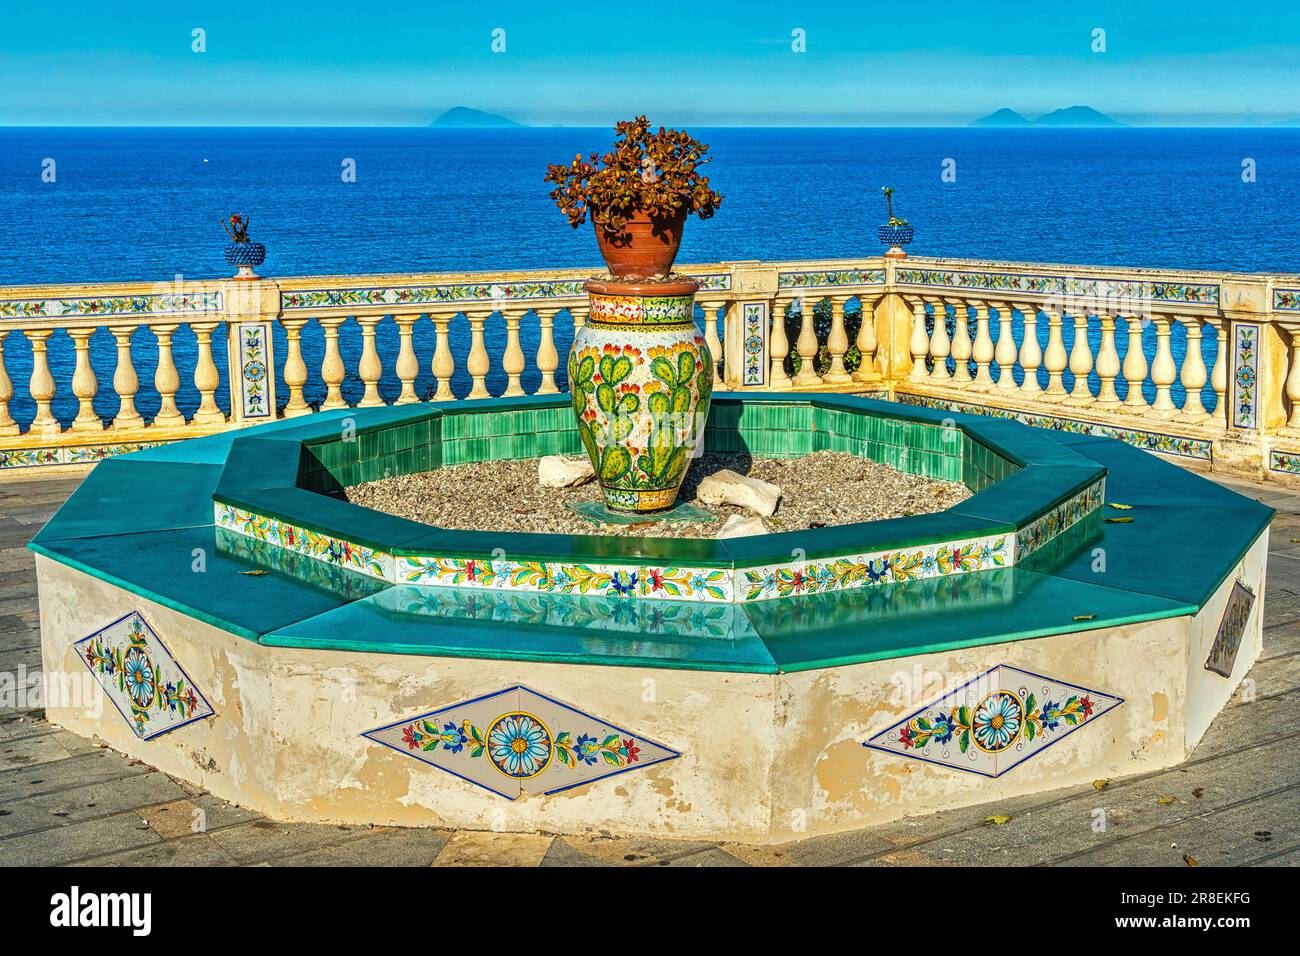 The Belvedere di Porta Palermo is richly decorated with the typical ceramics of the town overlooking the Tyrrhenian Sea. Santo Stefano di Camastra, Me Stock Photo